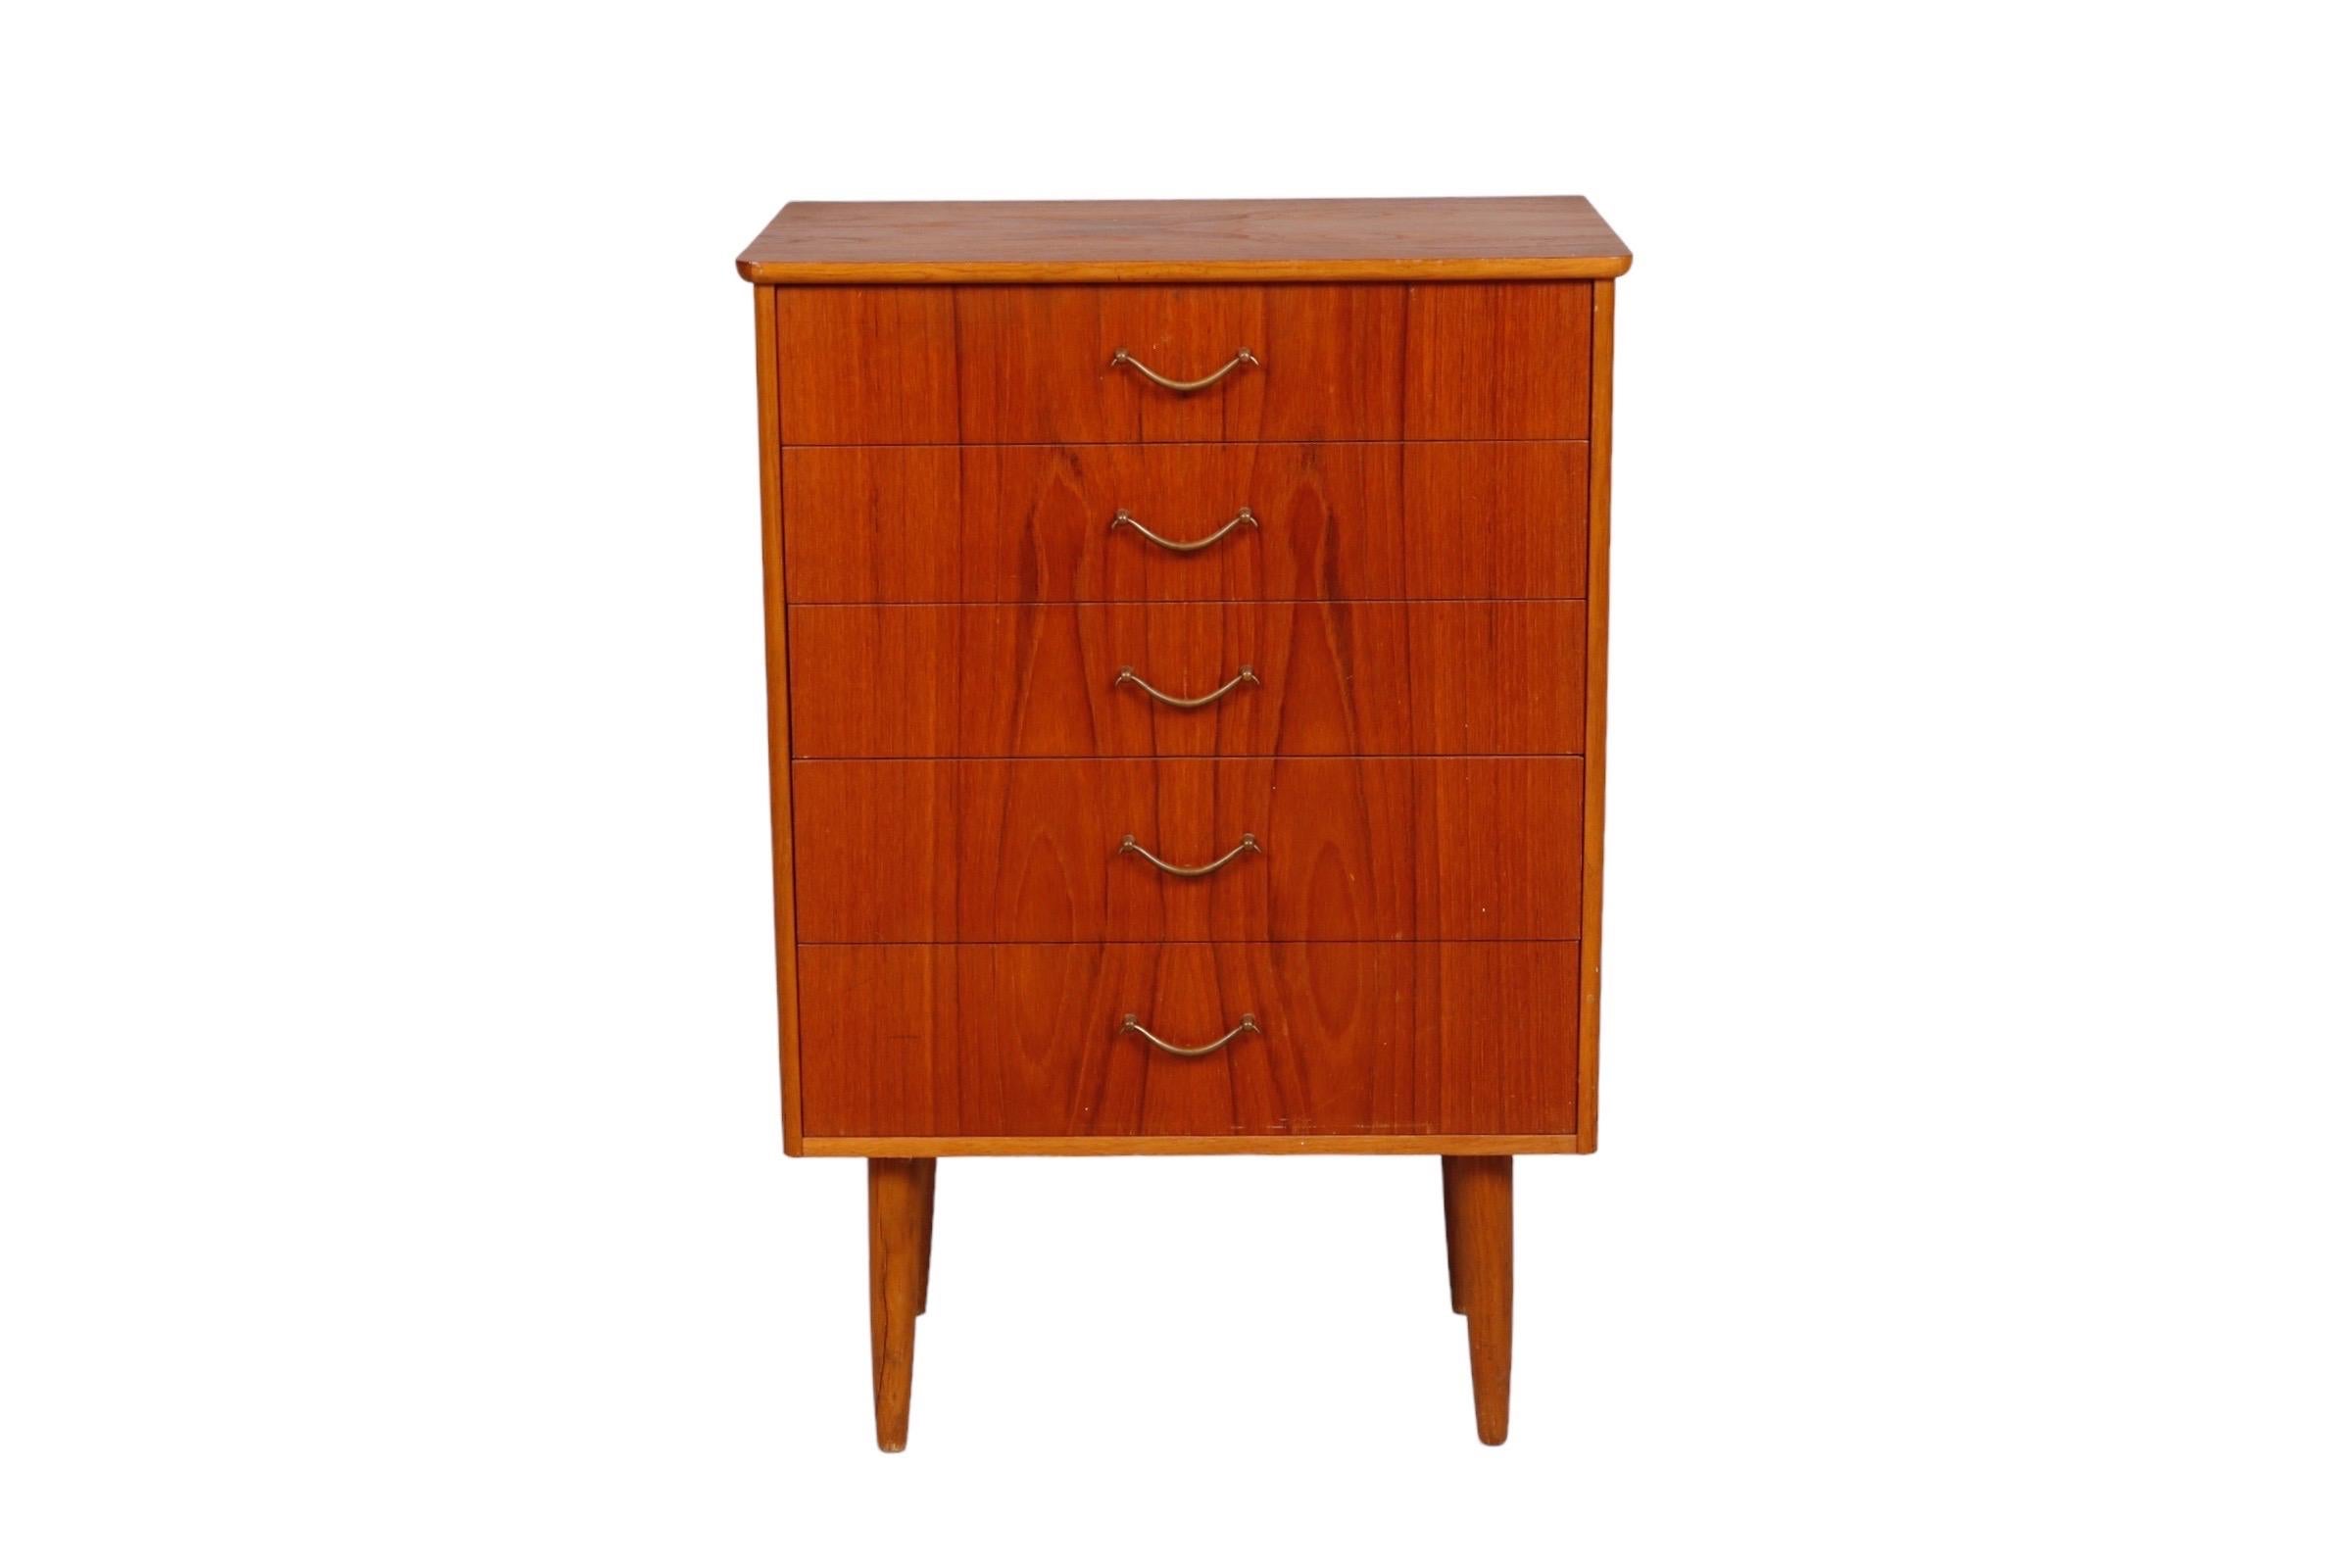 A petite mid-century dresser made of teak. Five drawers open with brass bail handles. Stands on round tapered legs.